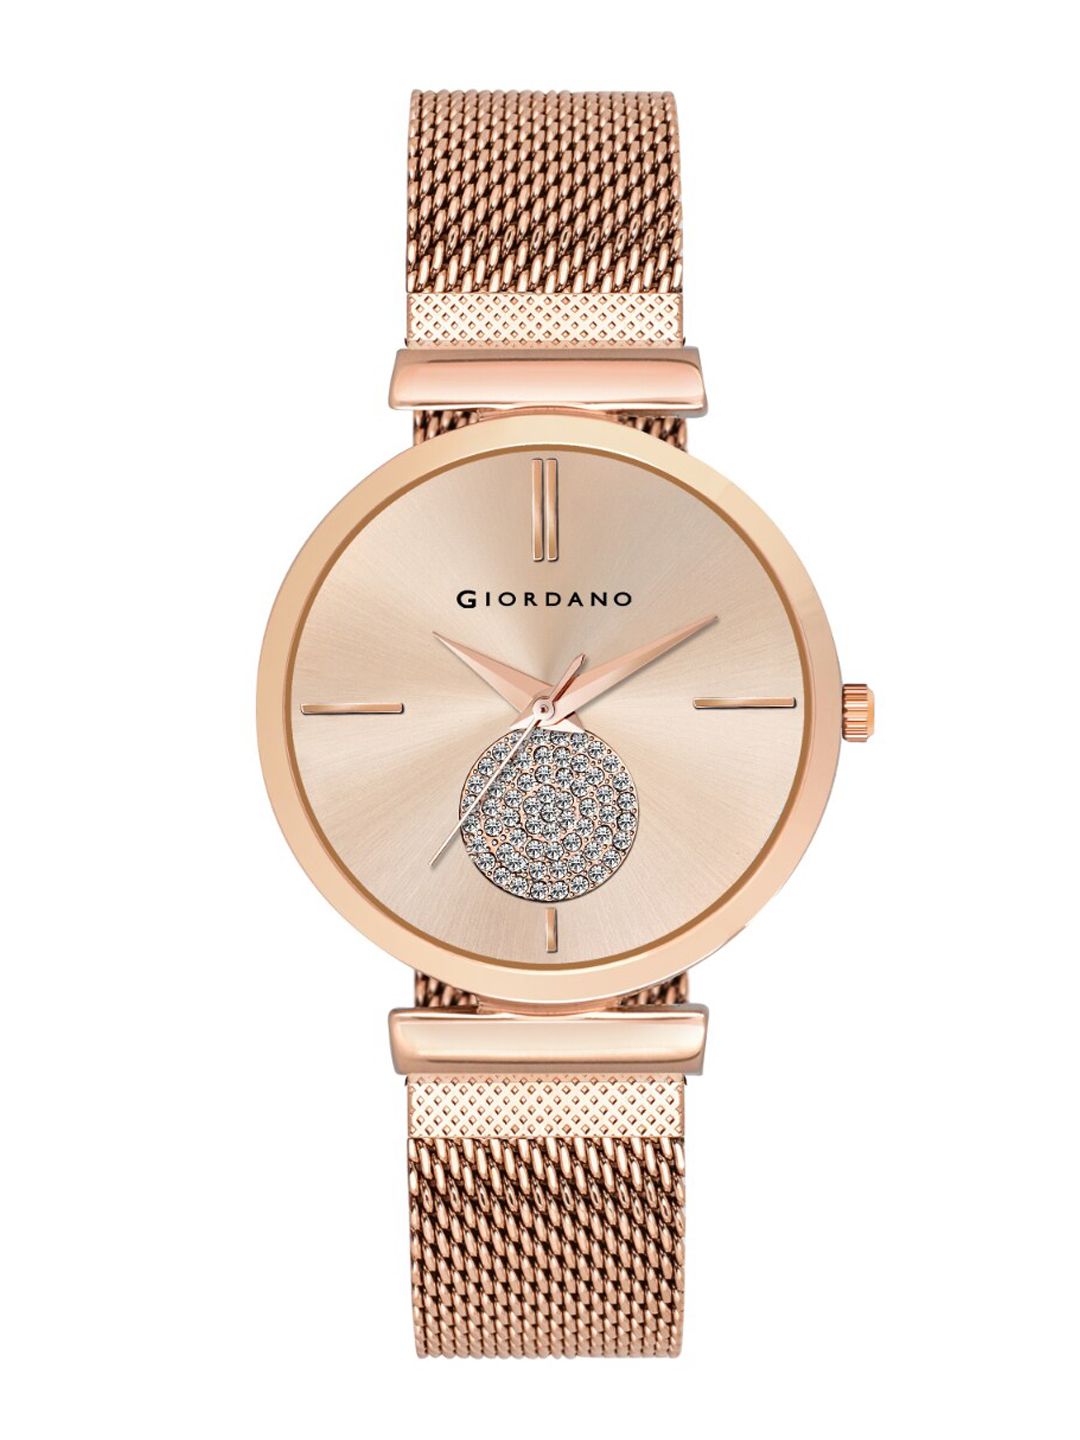 GIORDANO Women Rose Gold-Toned Bracelet Style Straps Analogue Watch GD-4066-33 Price in India